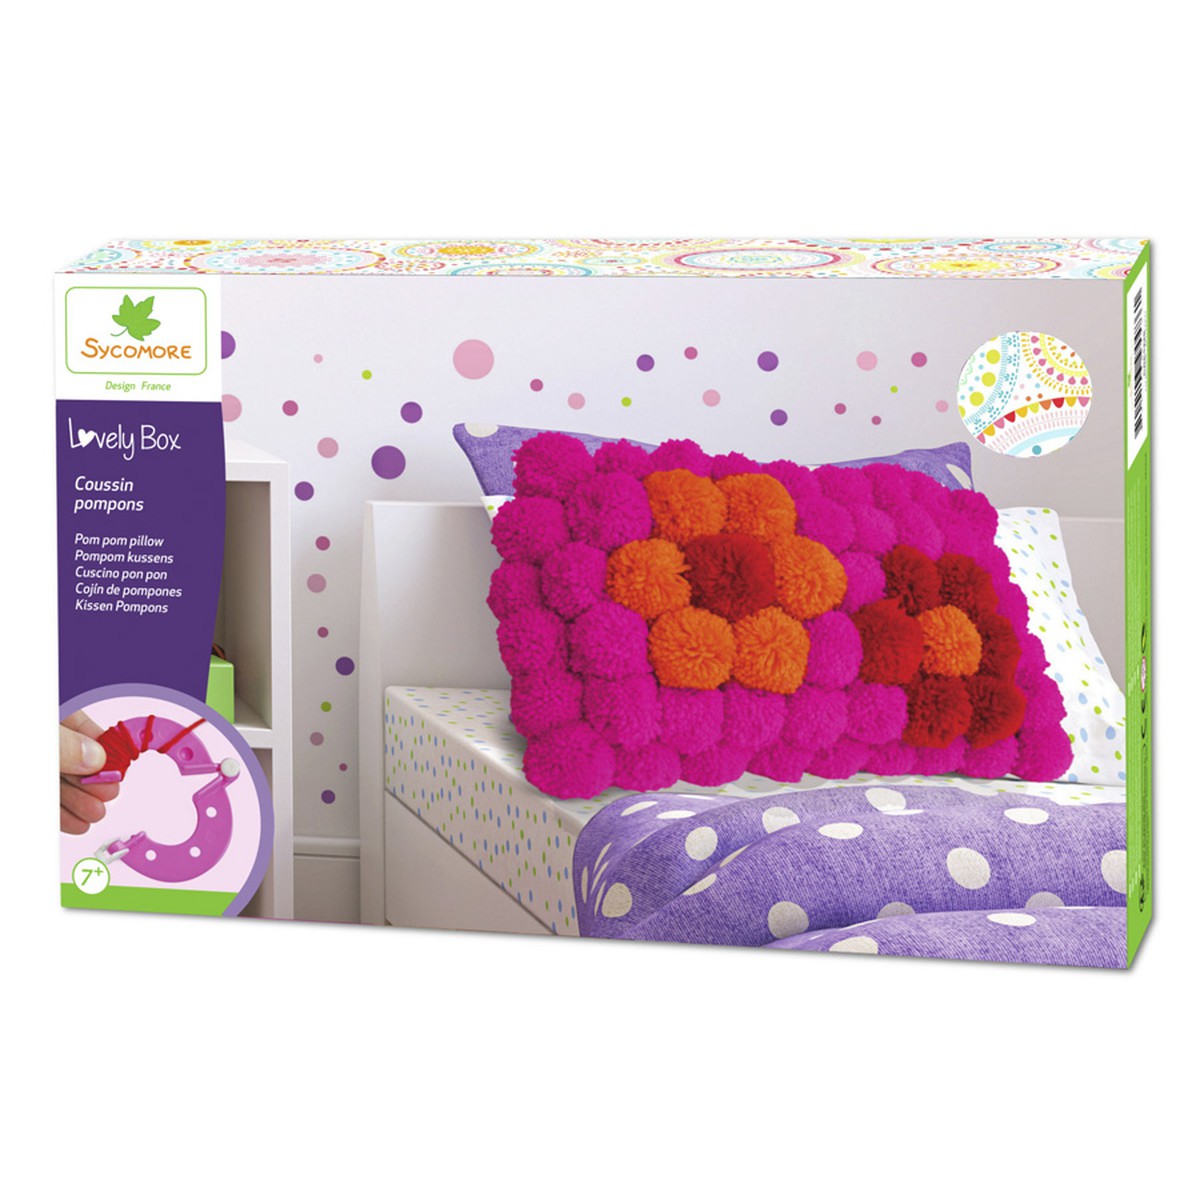 Sycomore  Lovely box XL coussin pompons  